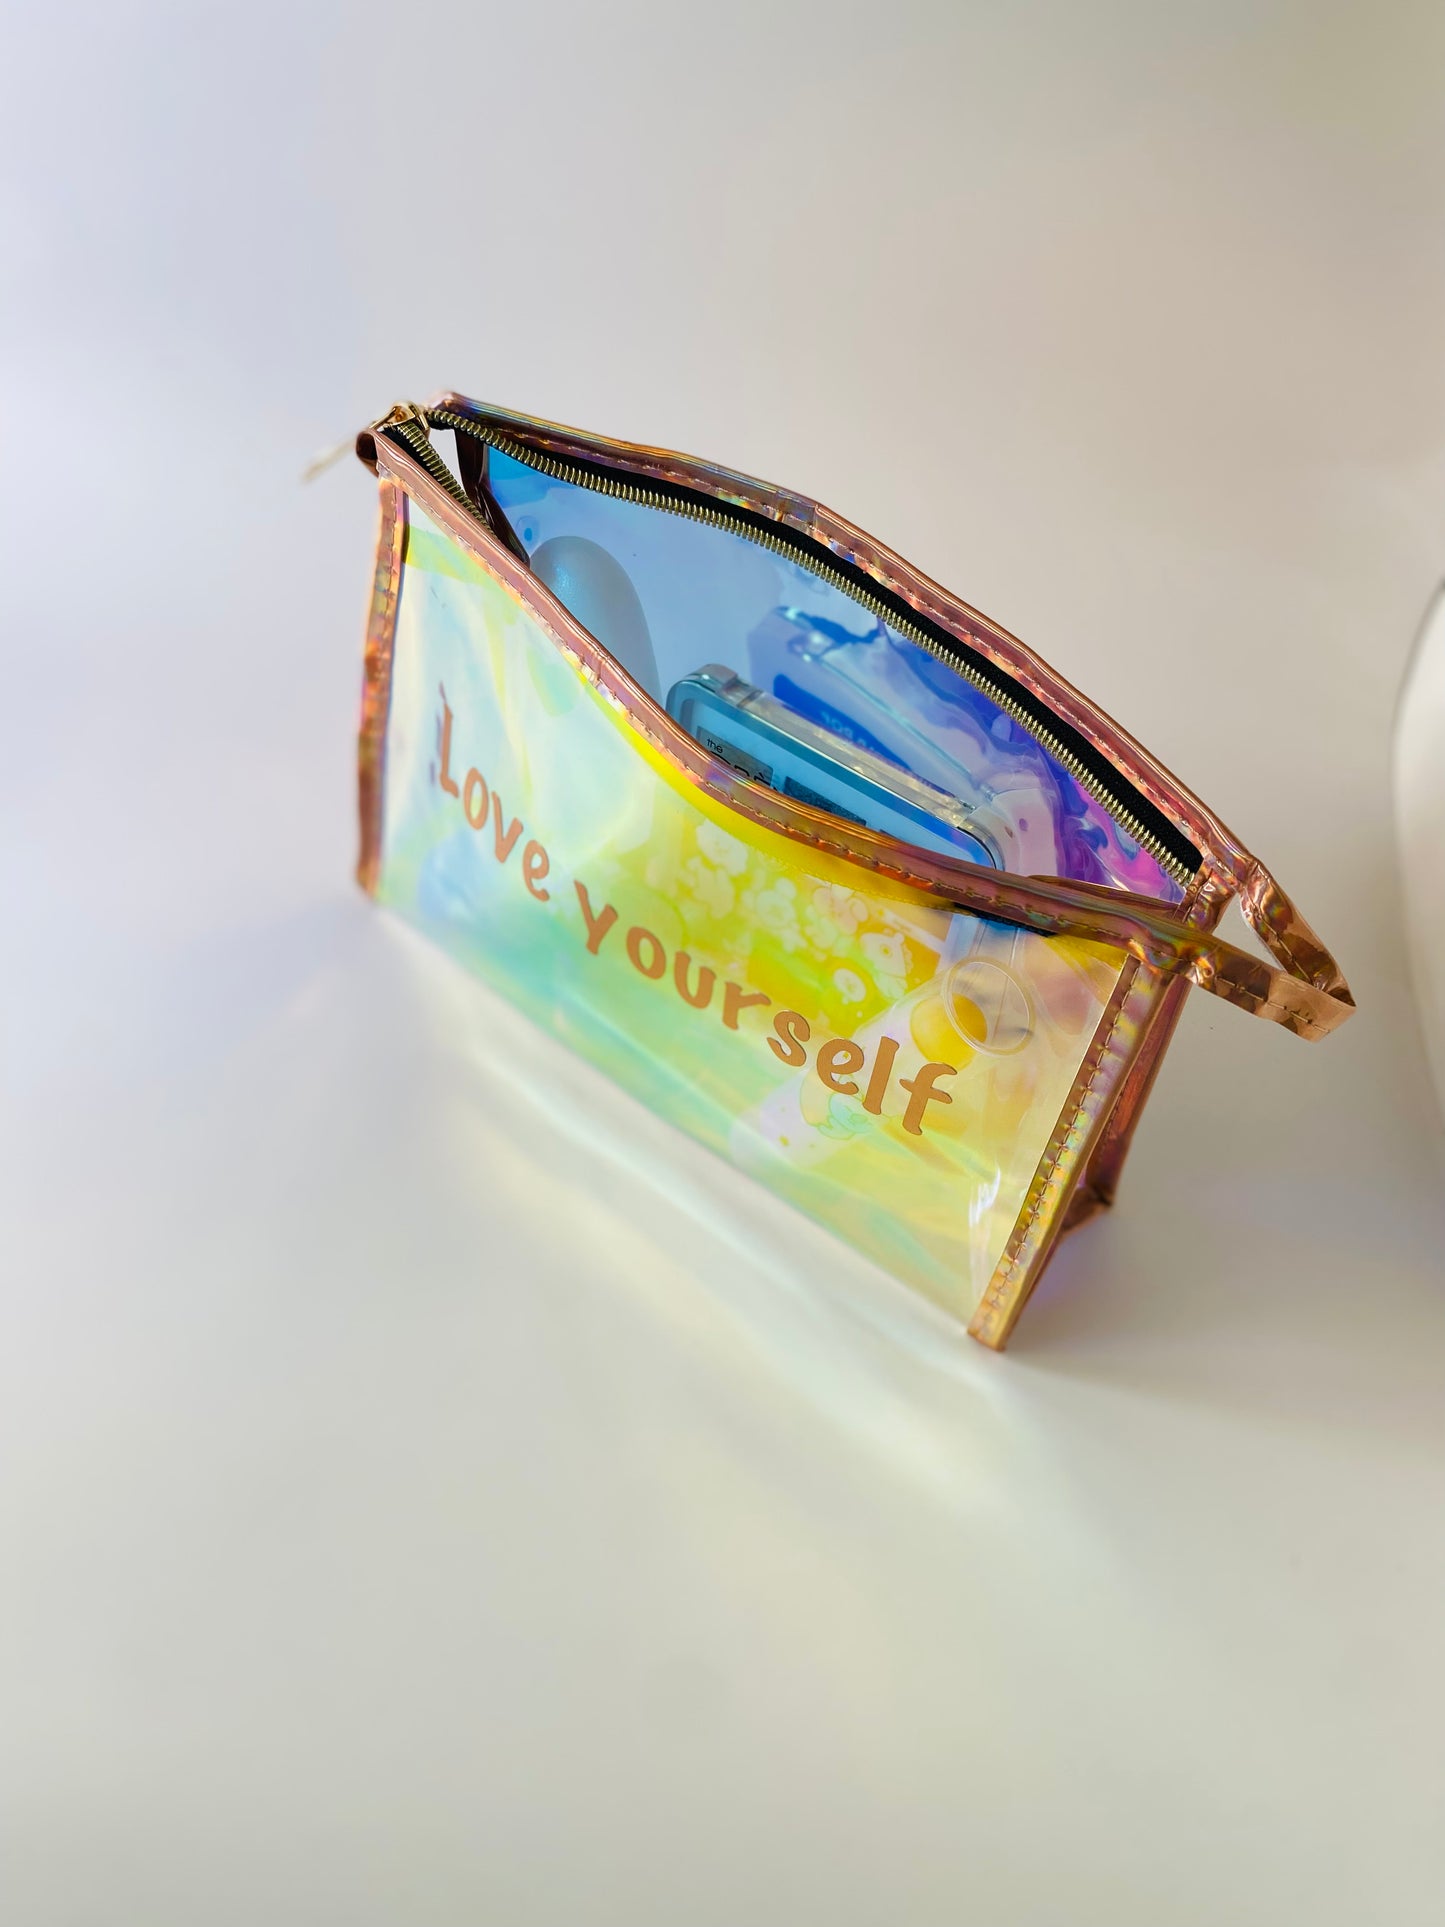 Love yourself - holographic cosmetic bag